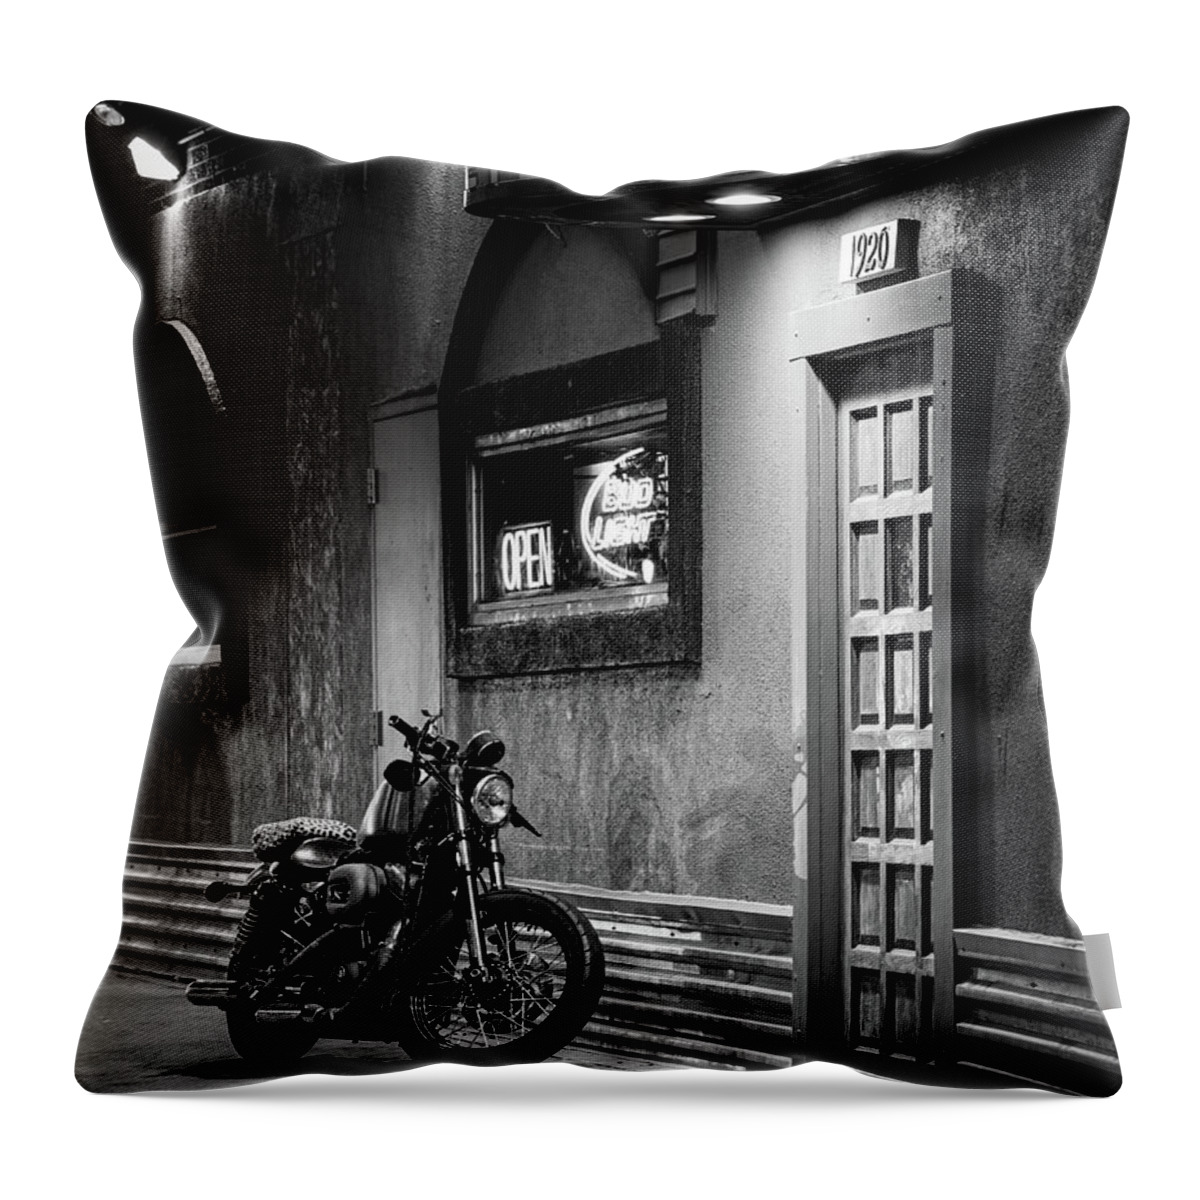 Colfax Throw Pillow featuring the photograph Still Life on Colfax by Stephen Holst